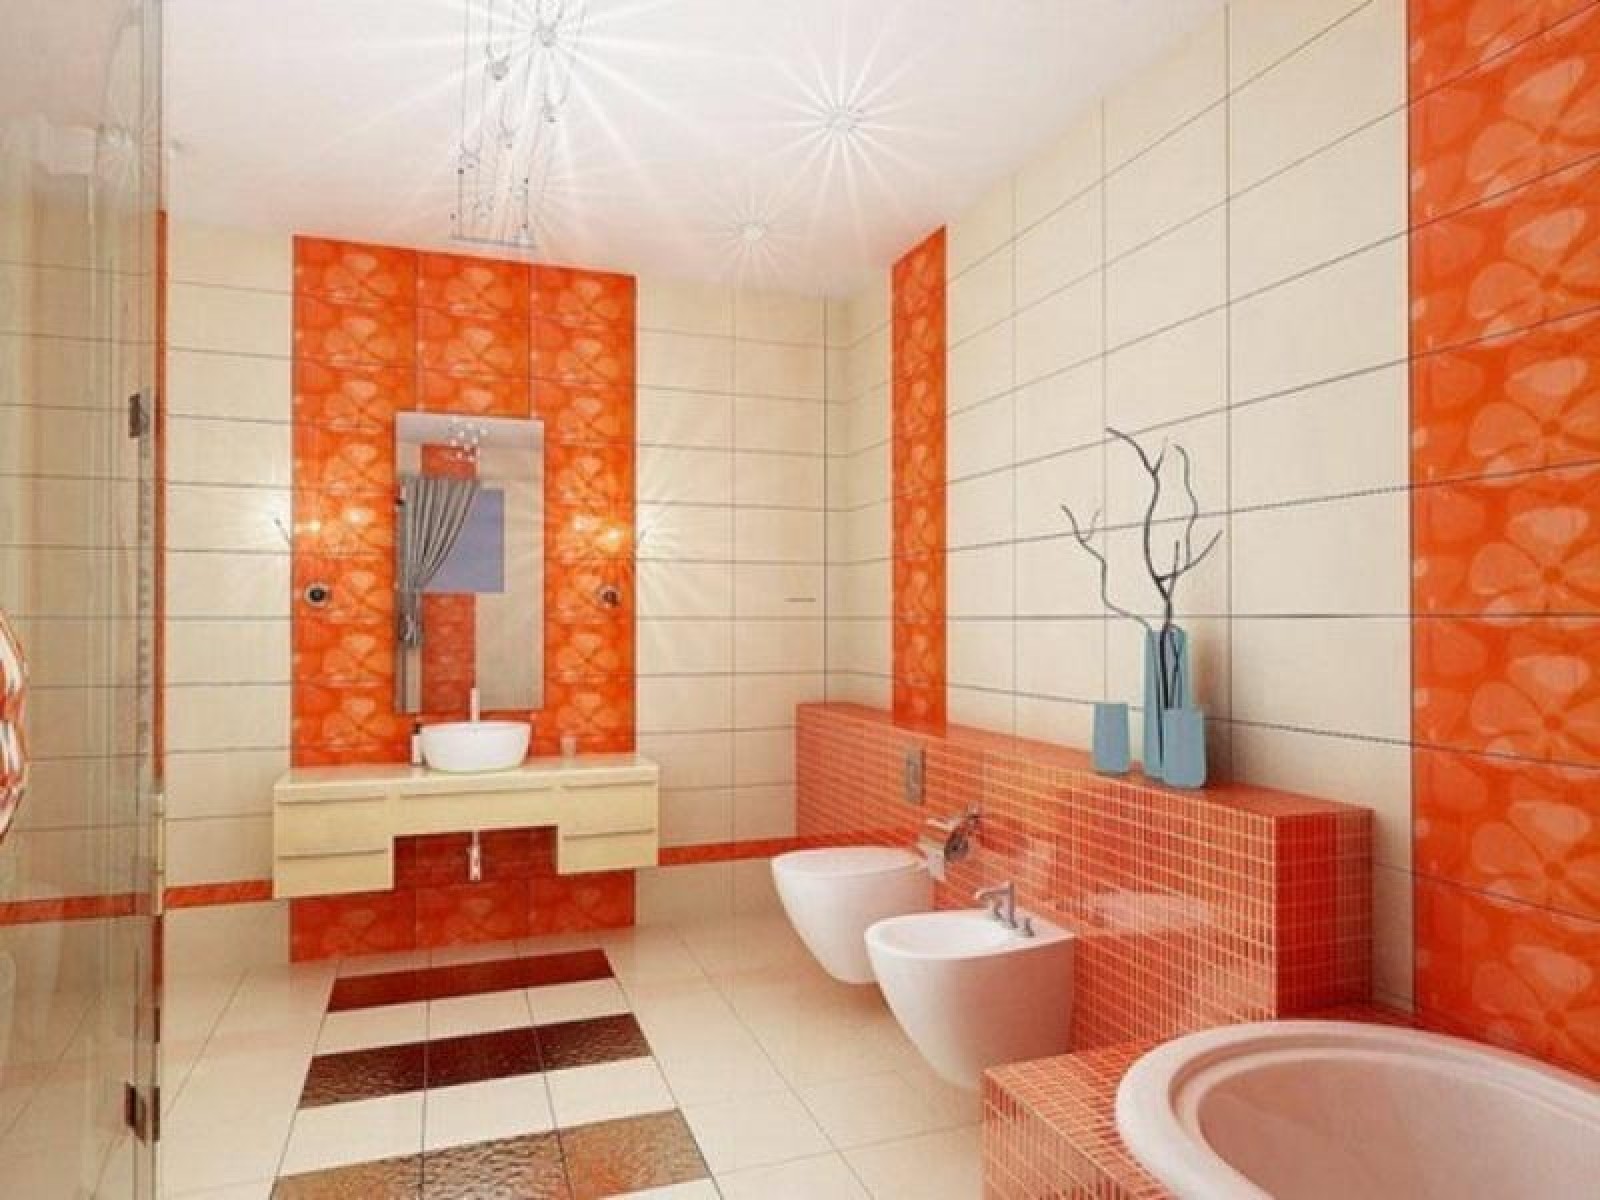 furniture-interior-bathroom-remodel-small-bathroom-affordable-furniture-contemporary-bathroom-ideas-modern-cabinets-to-go-ful-with-orange-tile-white-bathtub-in-design-small-bathroom-tile-ideas-m